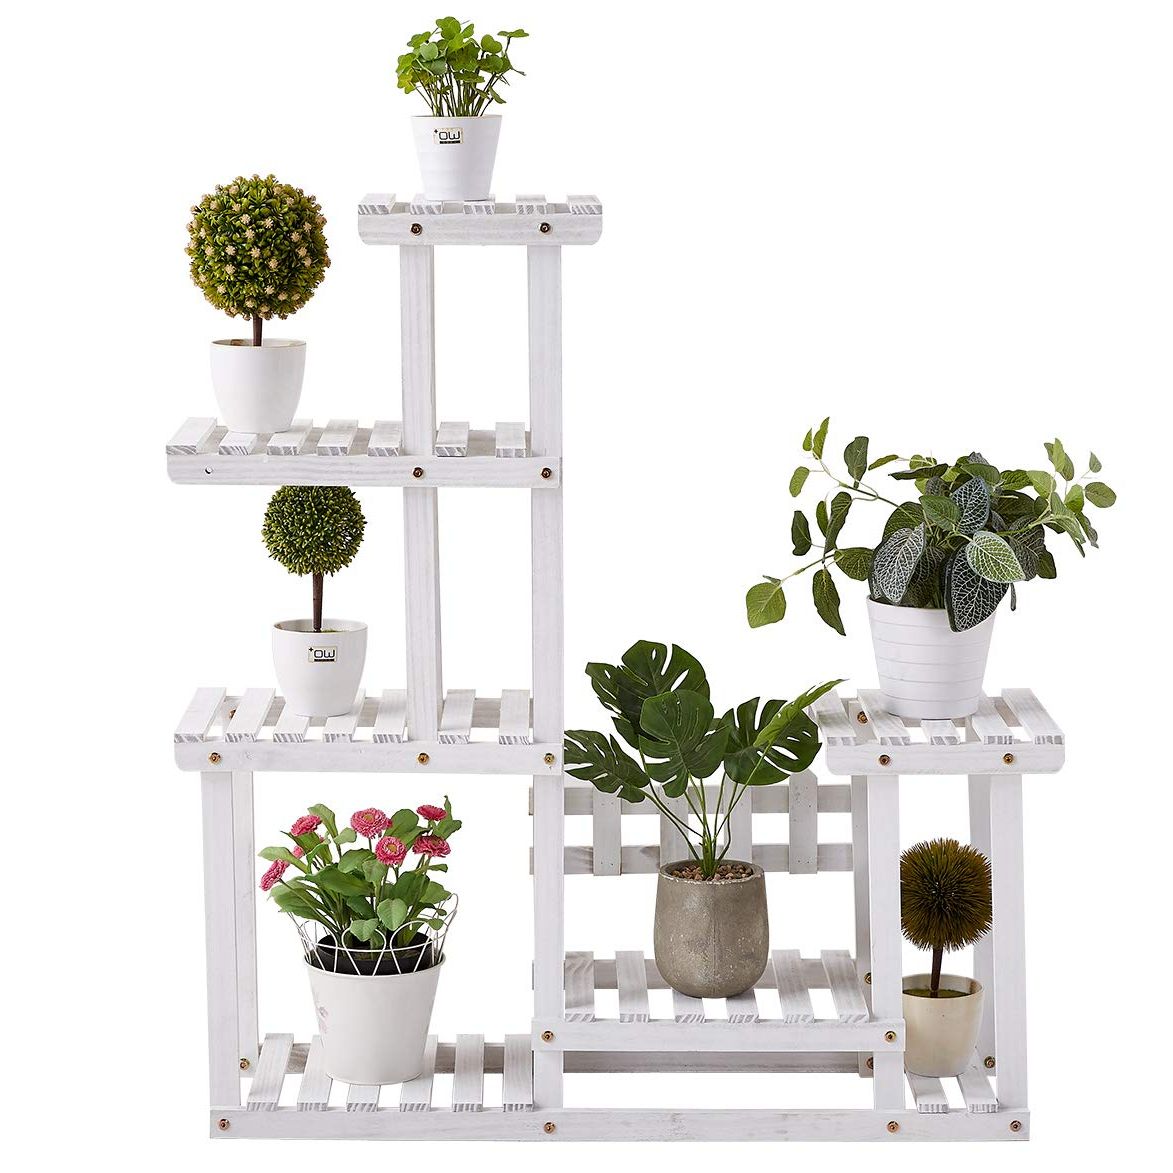 34 Inch Plant Stands Regarding Best And Newest Buy Rose Home Fashion Solid Pine Wood Plant Stand, Plant Stands Indoor,  Outdoor Plant Stand, Plant Shelf, Plant Stands, Antirust Screws,  White,overall Size: 33×34 Inch Online At Desertcartkuwait (View 9 of 10)